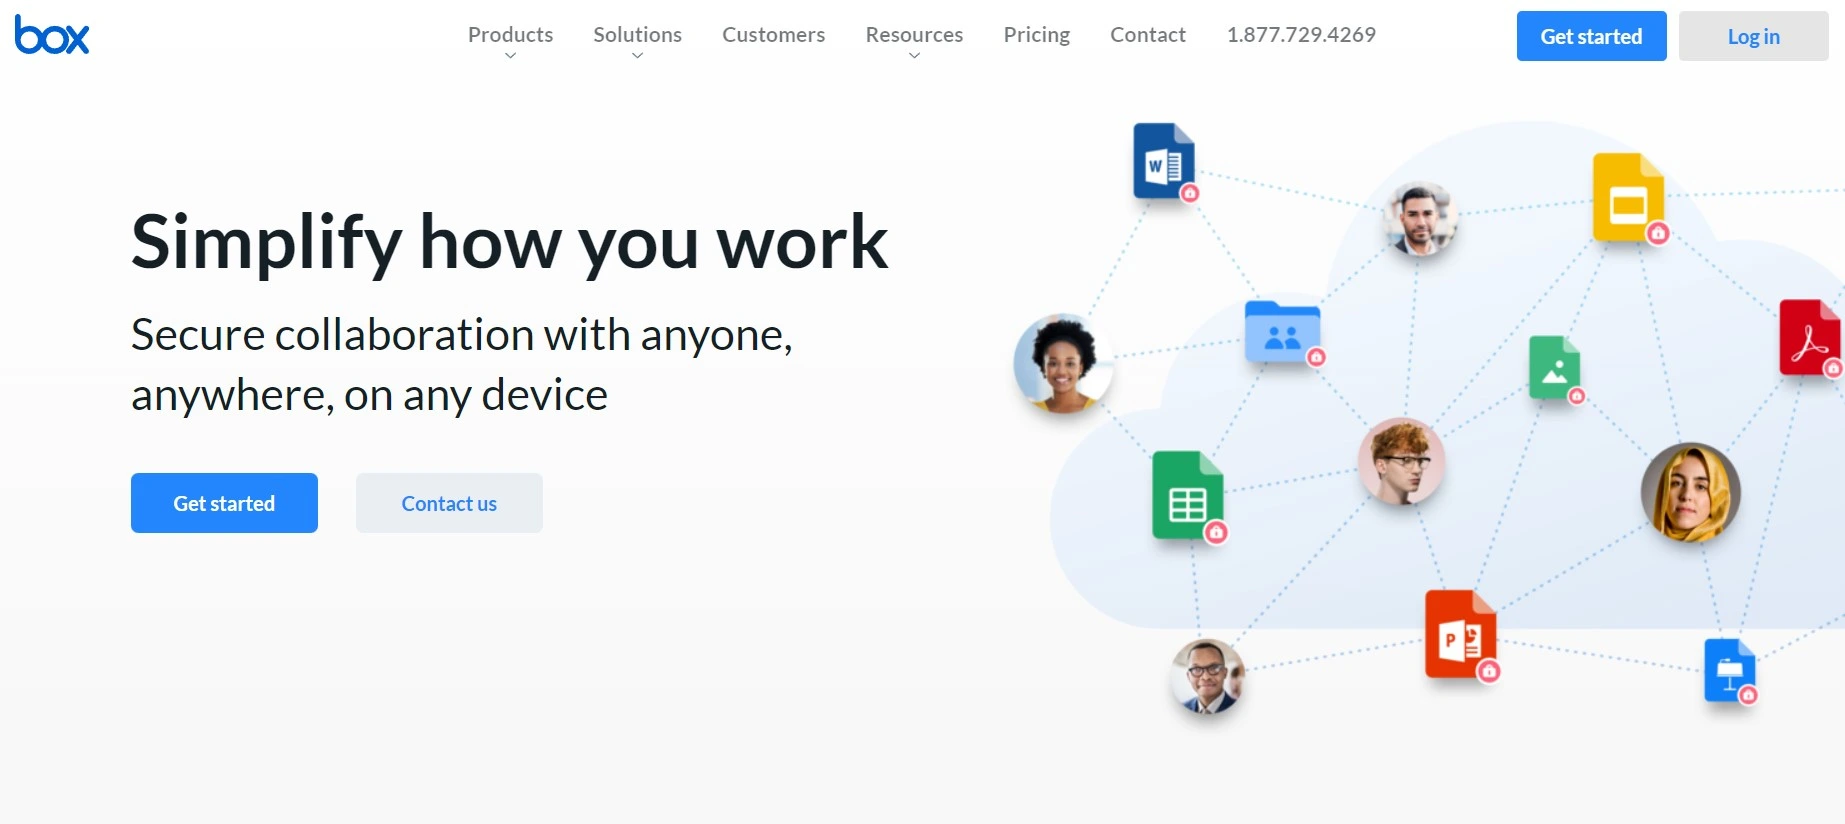 Box lets you secure collaboration